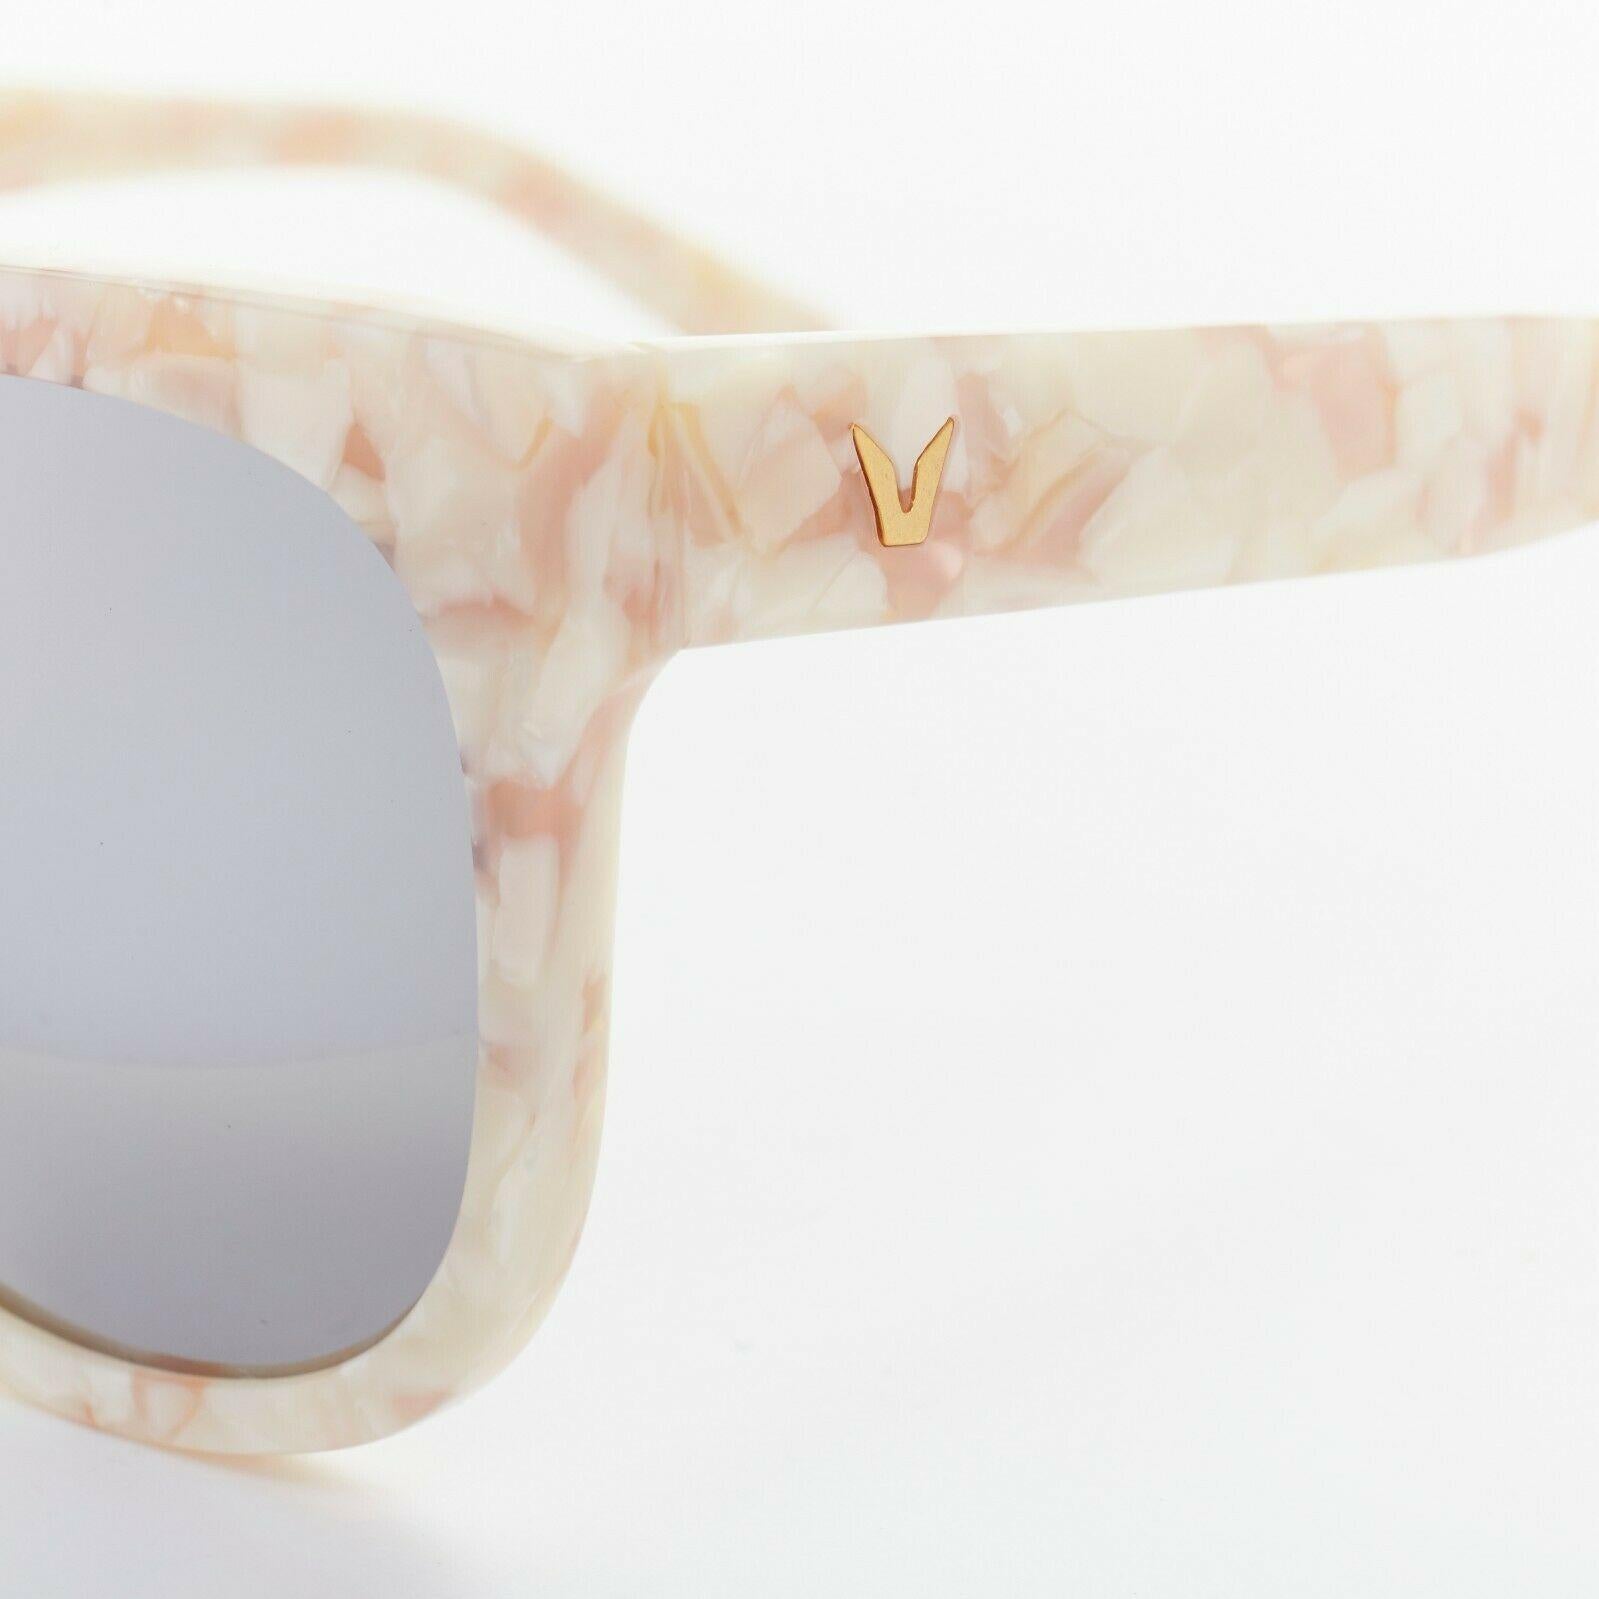 GENTLE MONSTER DIDI D beige marble resin square reflective lens sunglasses
GENTLE MONSTER
Didi D. 
Beige marble-like plastic frame. 
Rectagular frame. 
Moulded nose pad. 
Gold logo plate at leg. 
Made in China.

CONDITION:
Very good, this item was